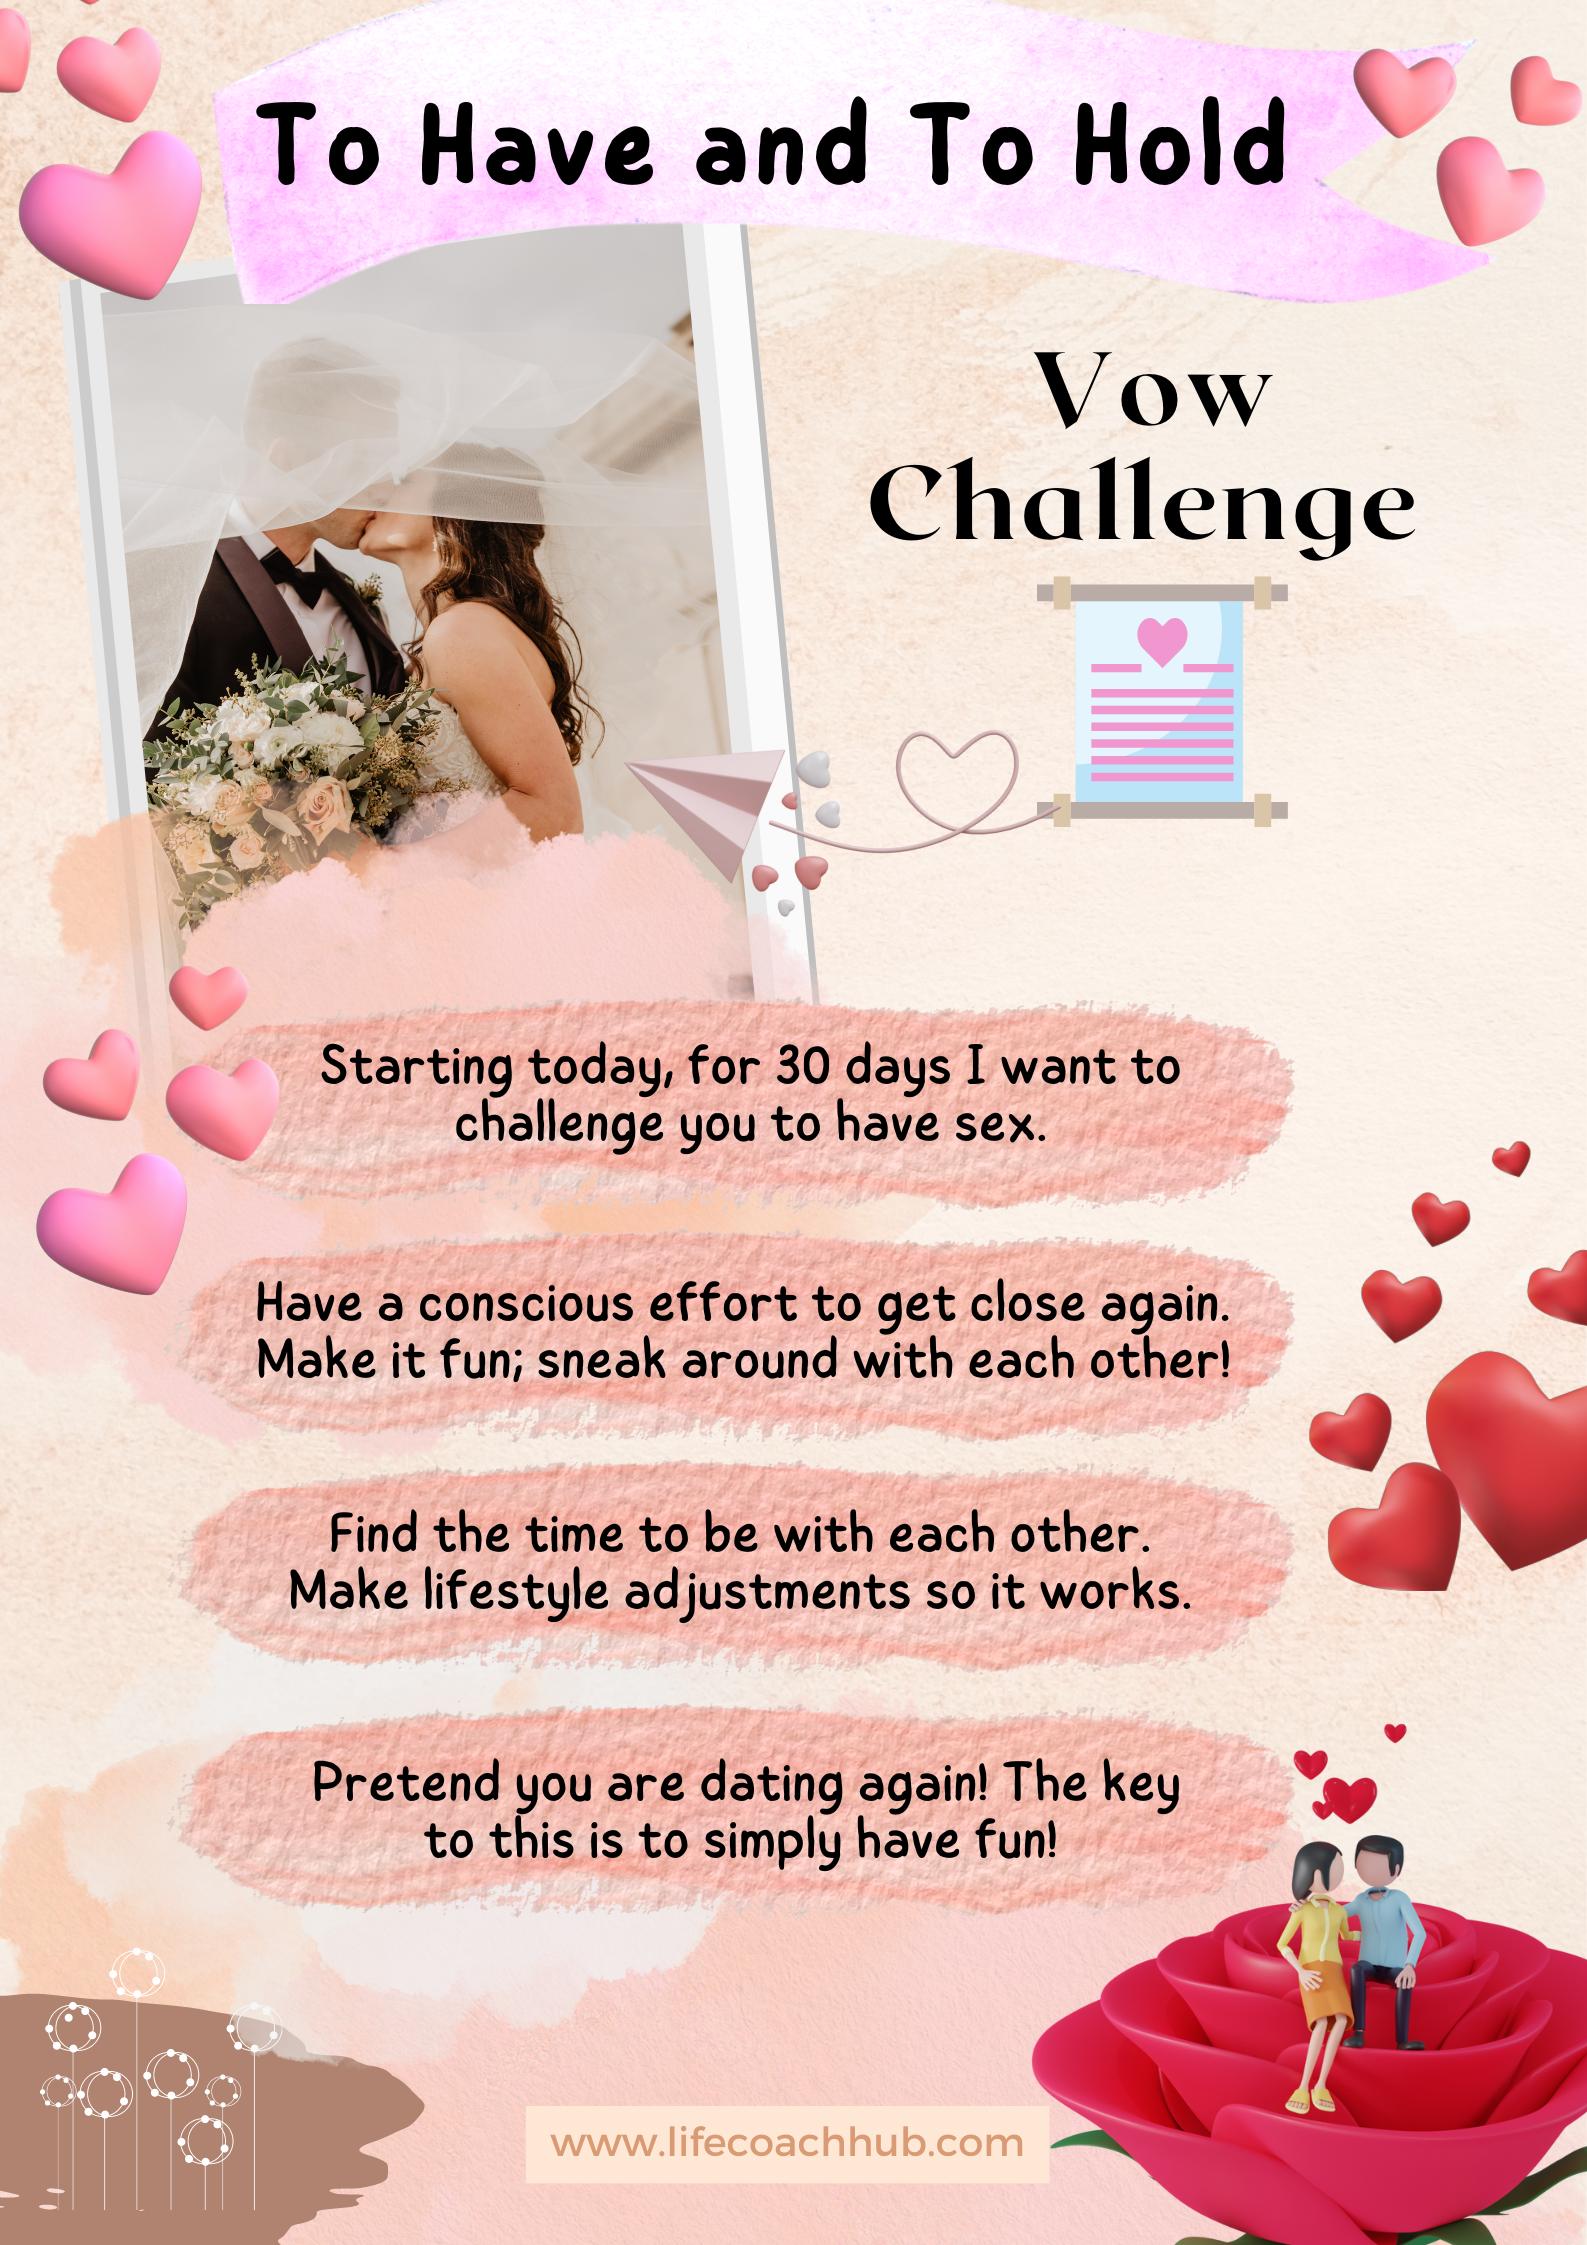 To have and to hold Vow challenge